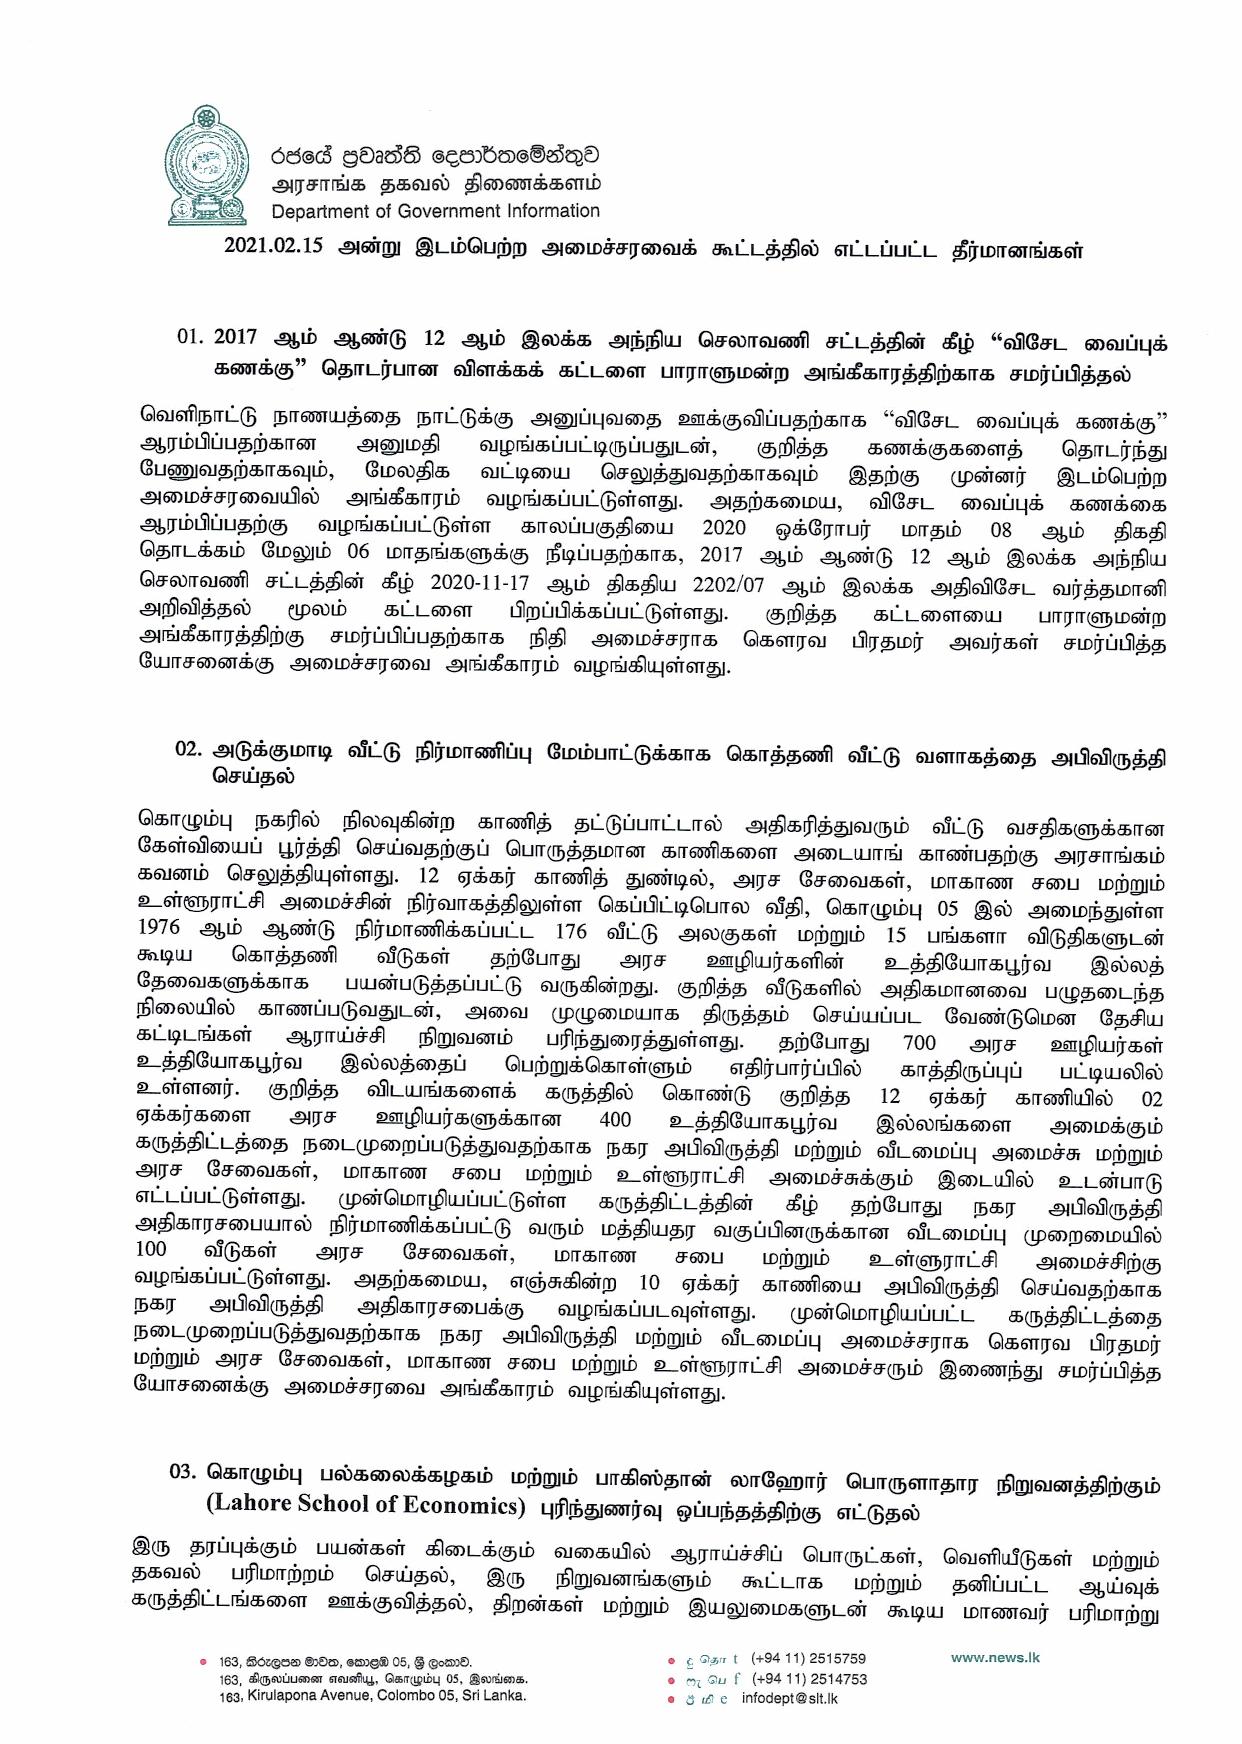 Cabinet Decison on 15.02.2021 Tamil page 001